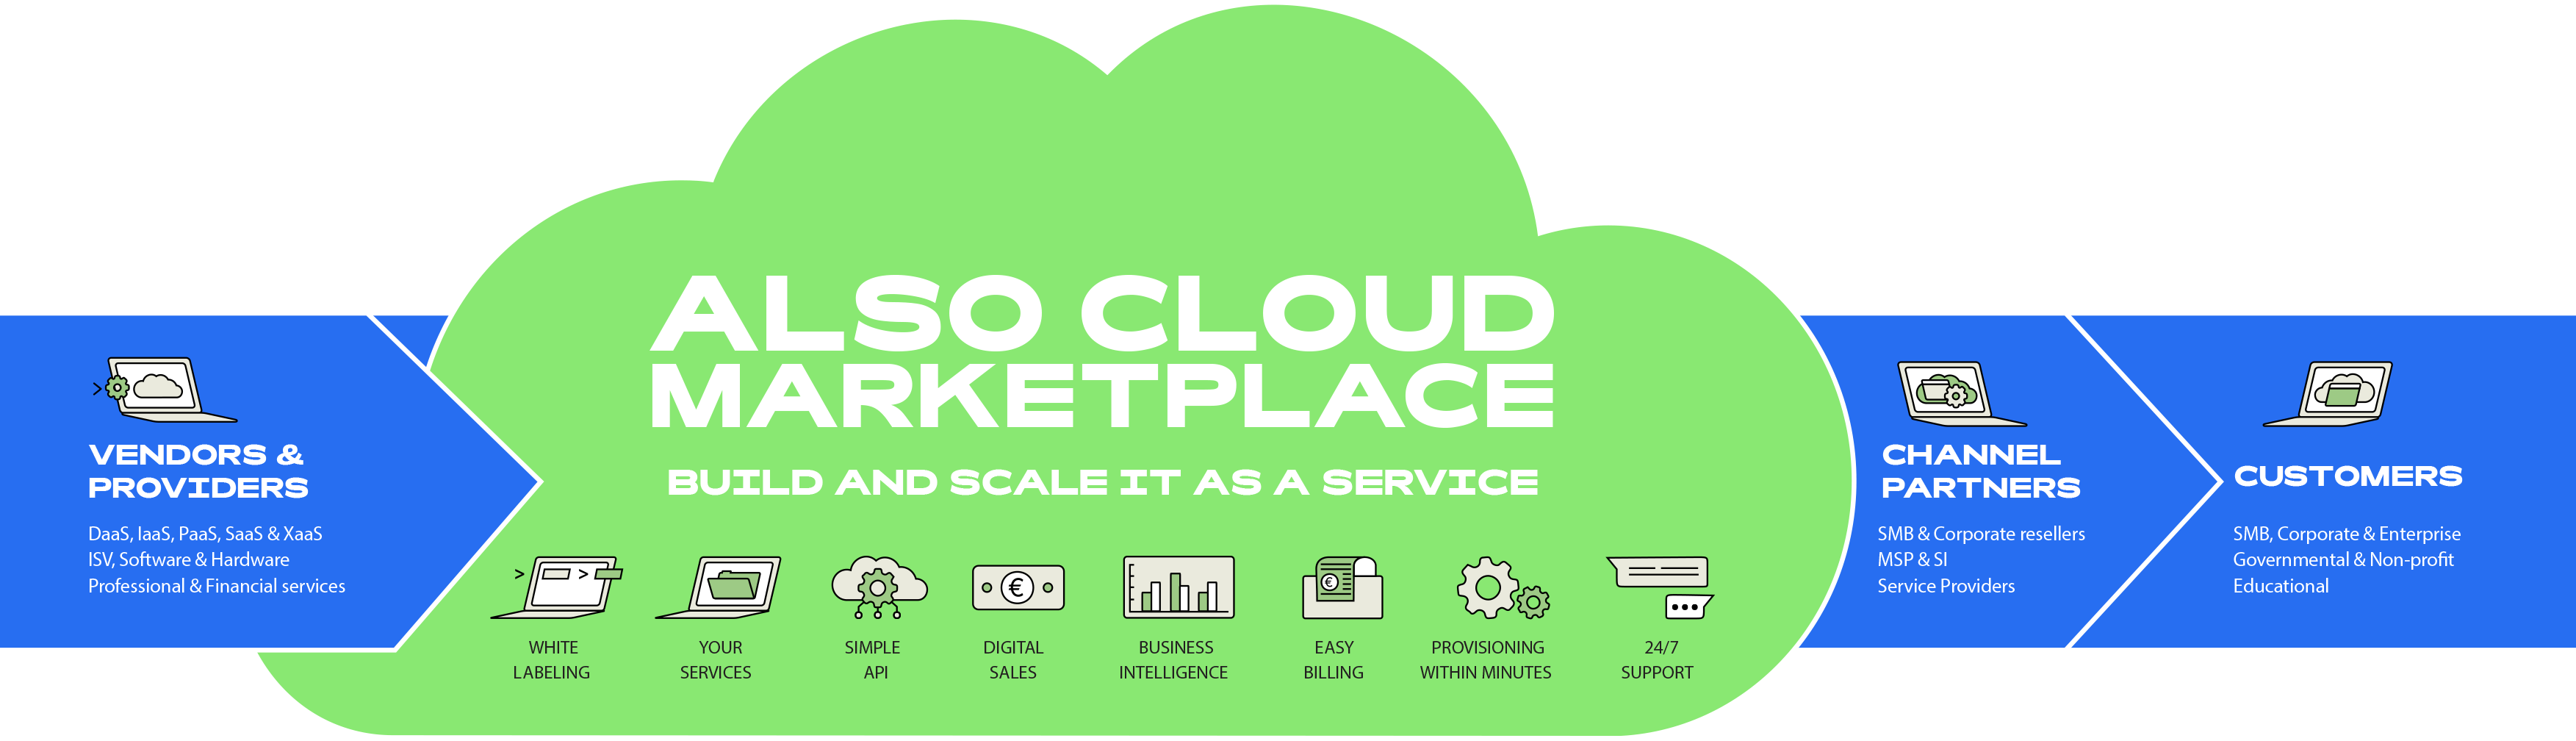 Whether you are new to the Cloud solutions business or already have experience in this area, and regardless of the size of your company, we are here to help you succeed.